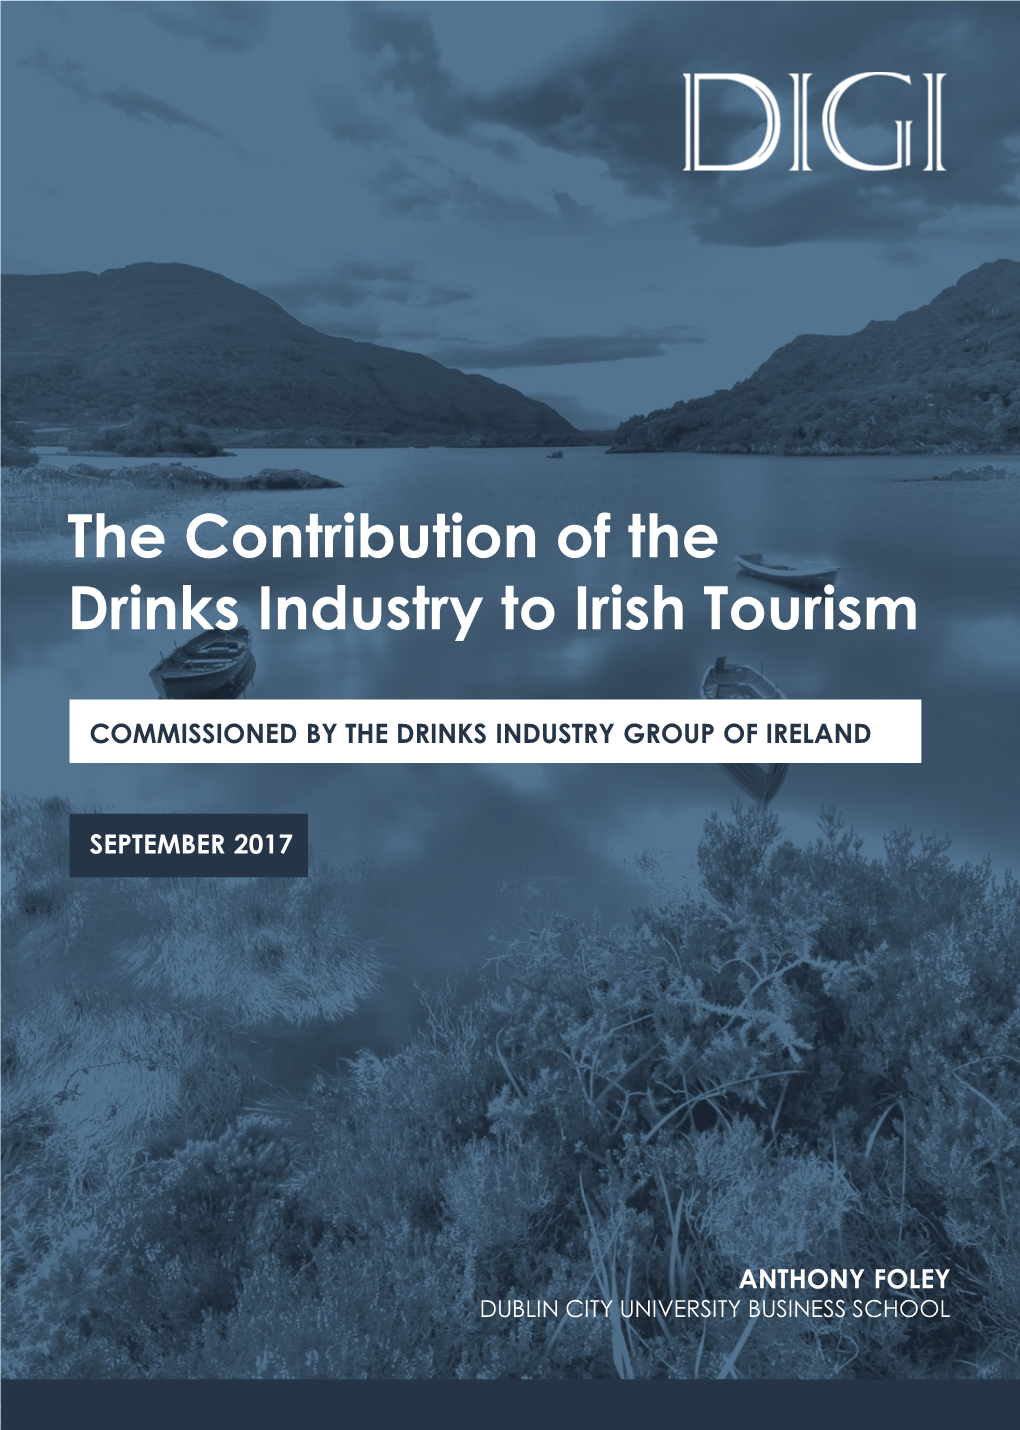 The Contribution of the Drinks Industry to Irish Tourism